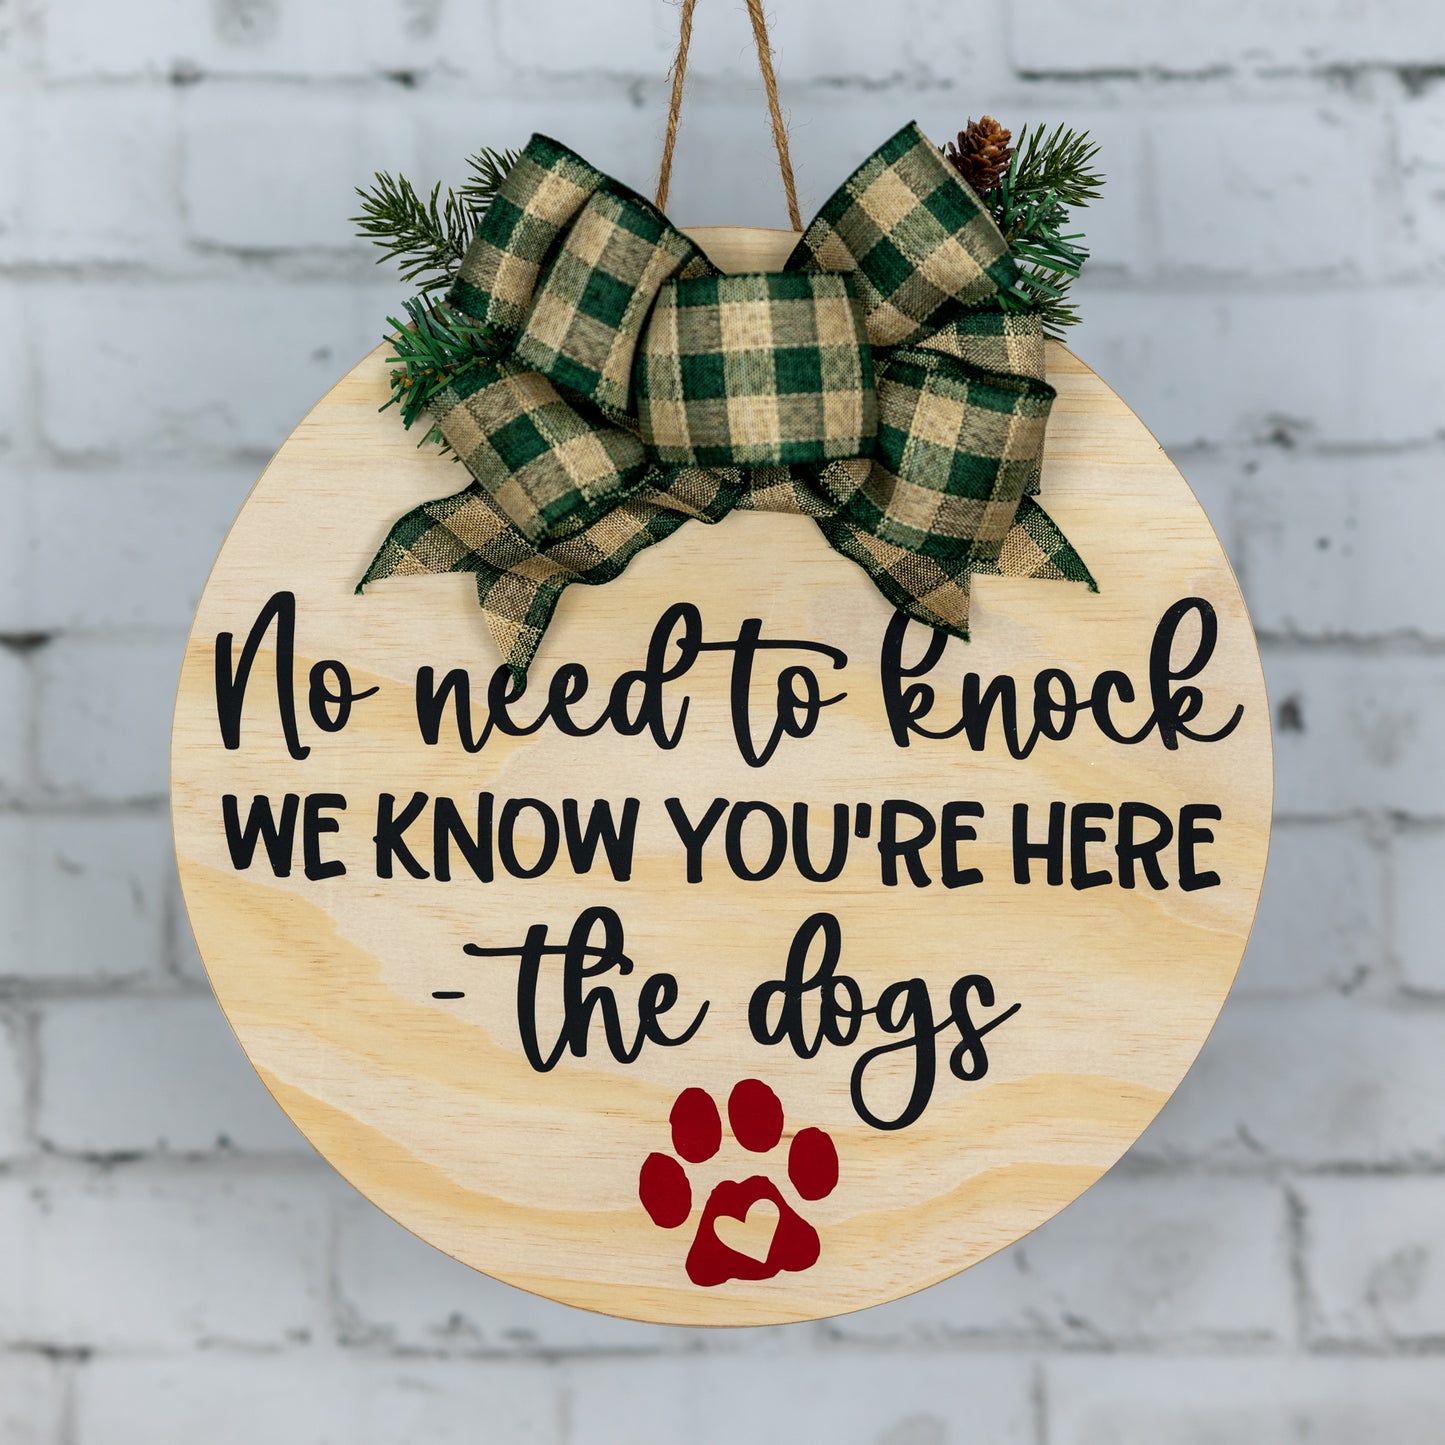 no need to knock we know you're here, the dogs ~ round door sign